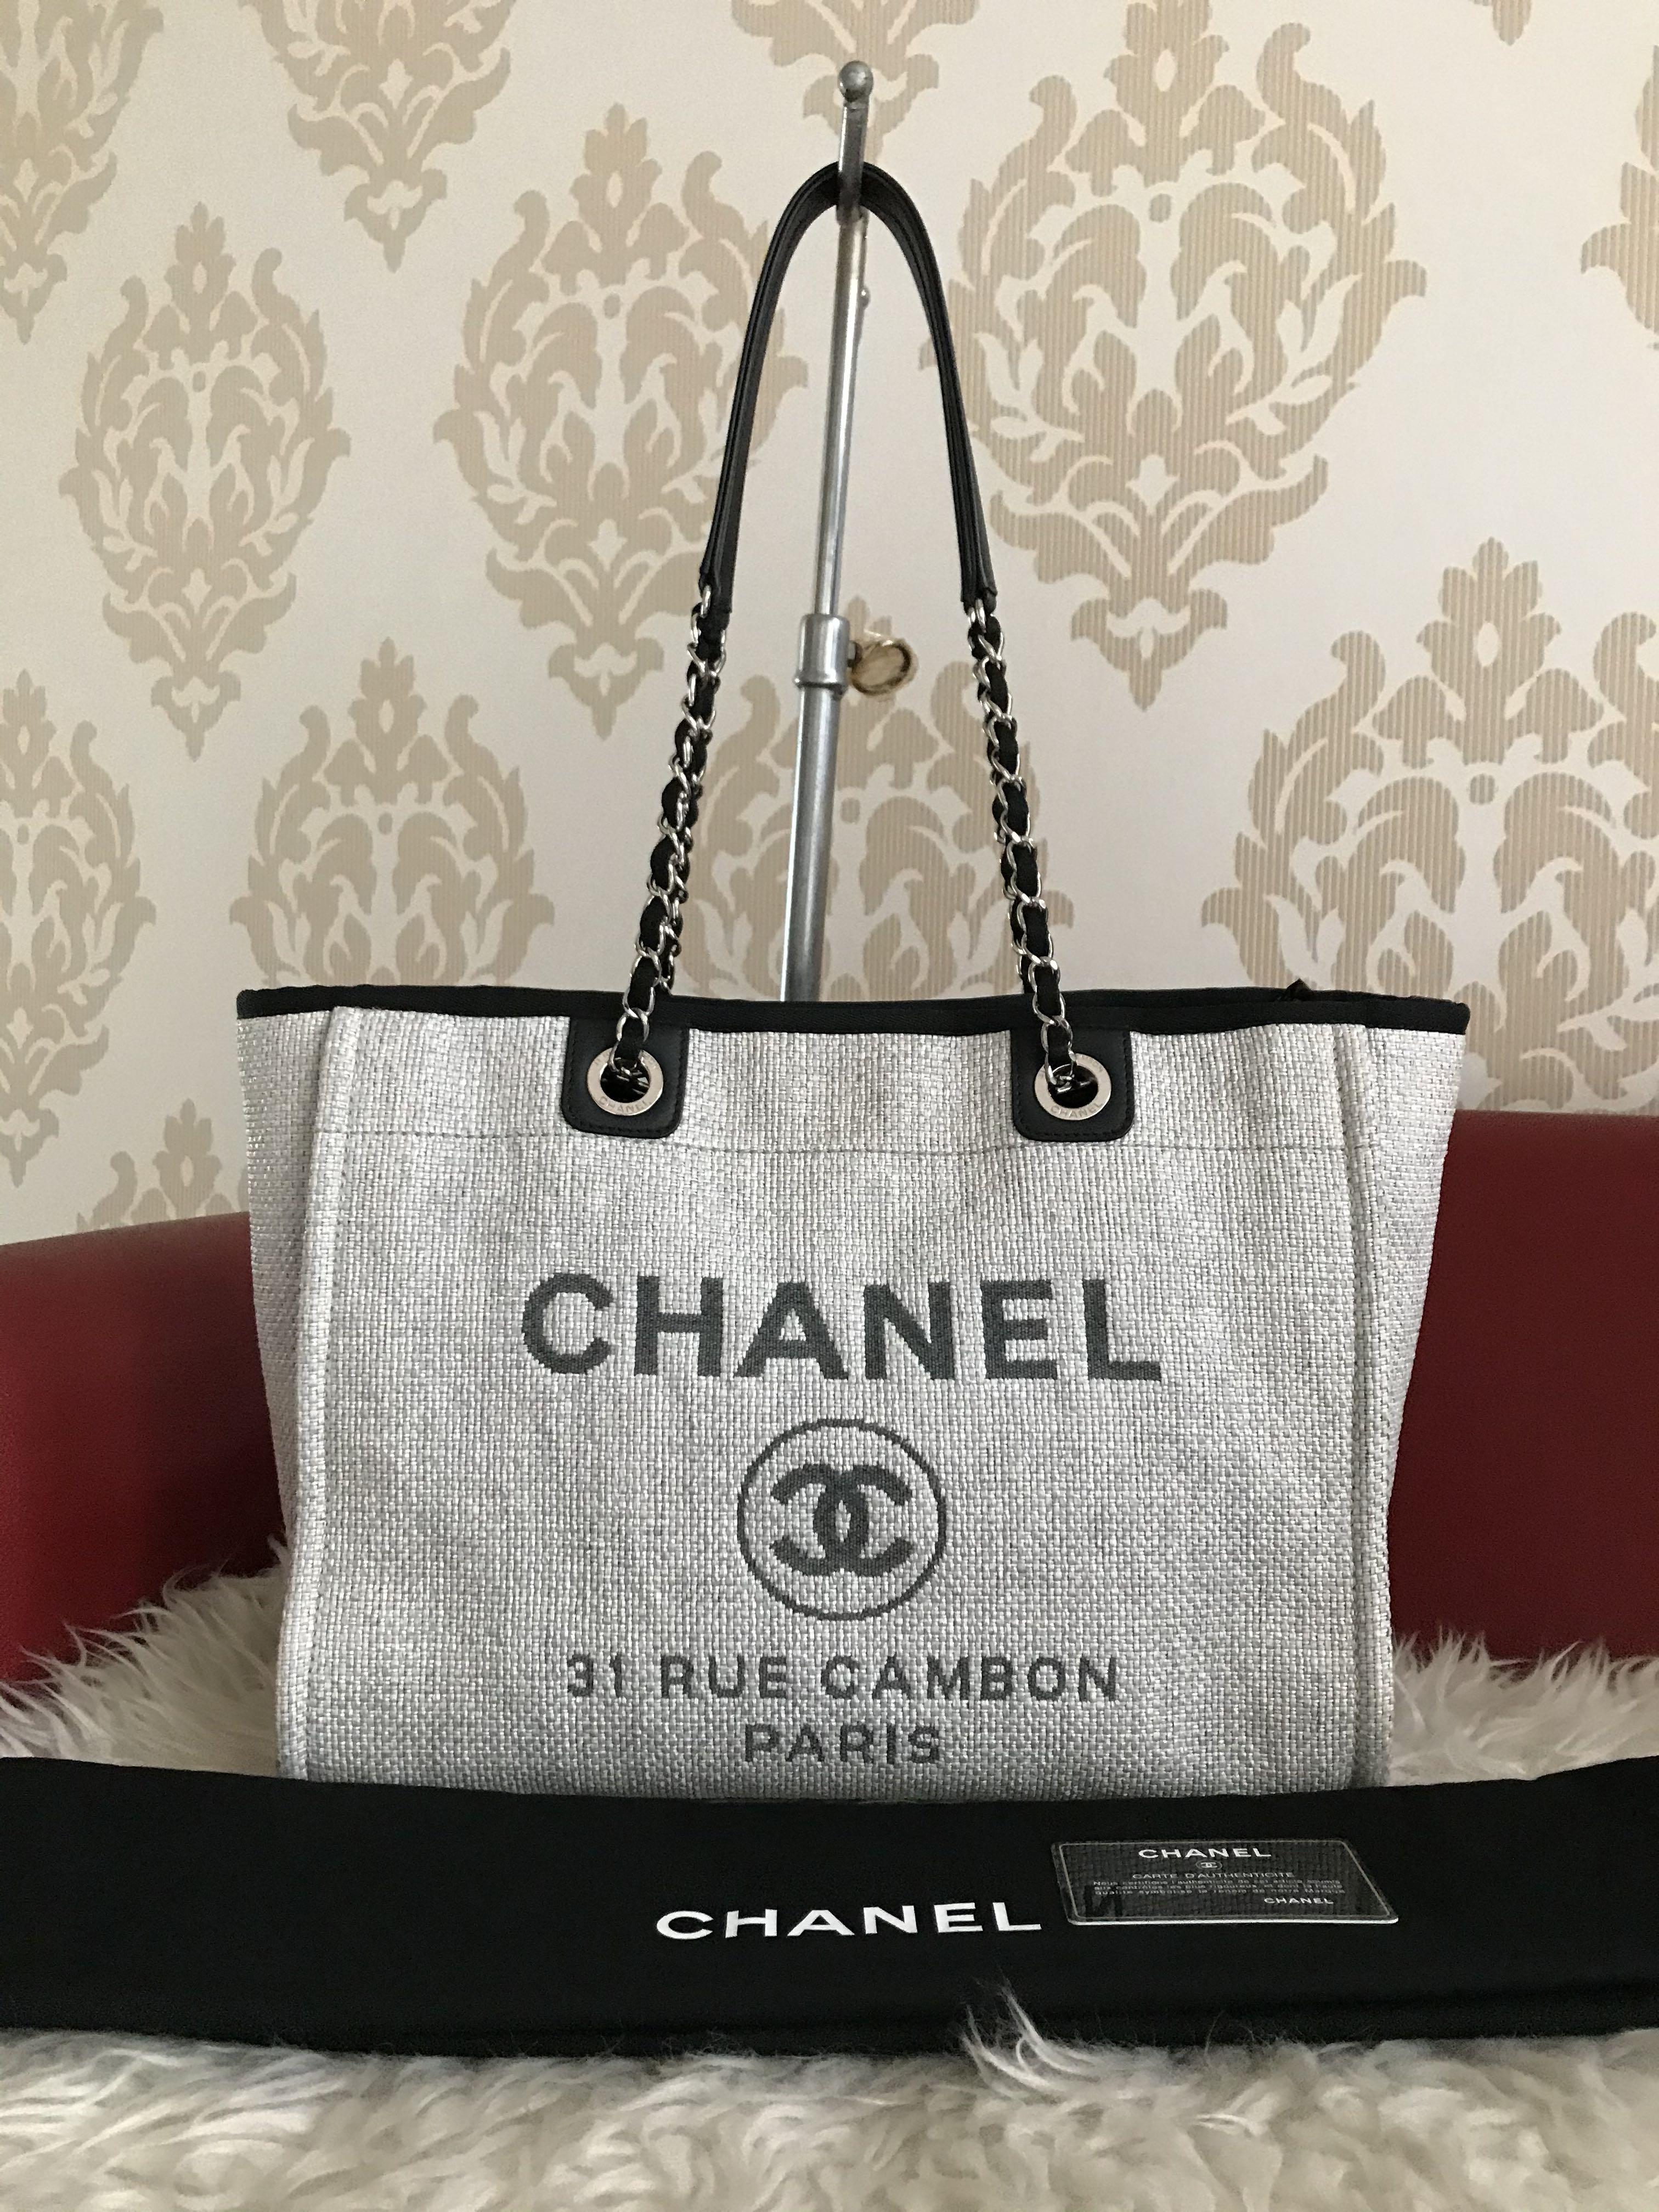 Chanel Medium Deauville Tote Bag NEW 2020 - Consigned Designs